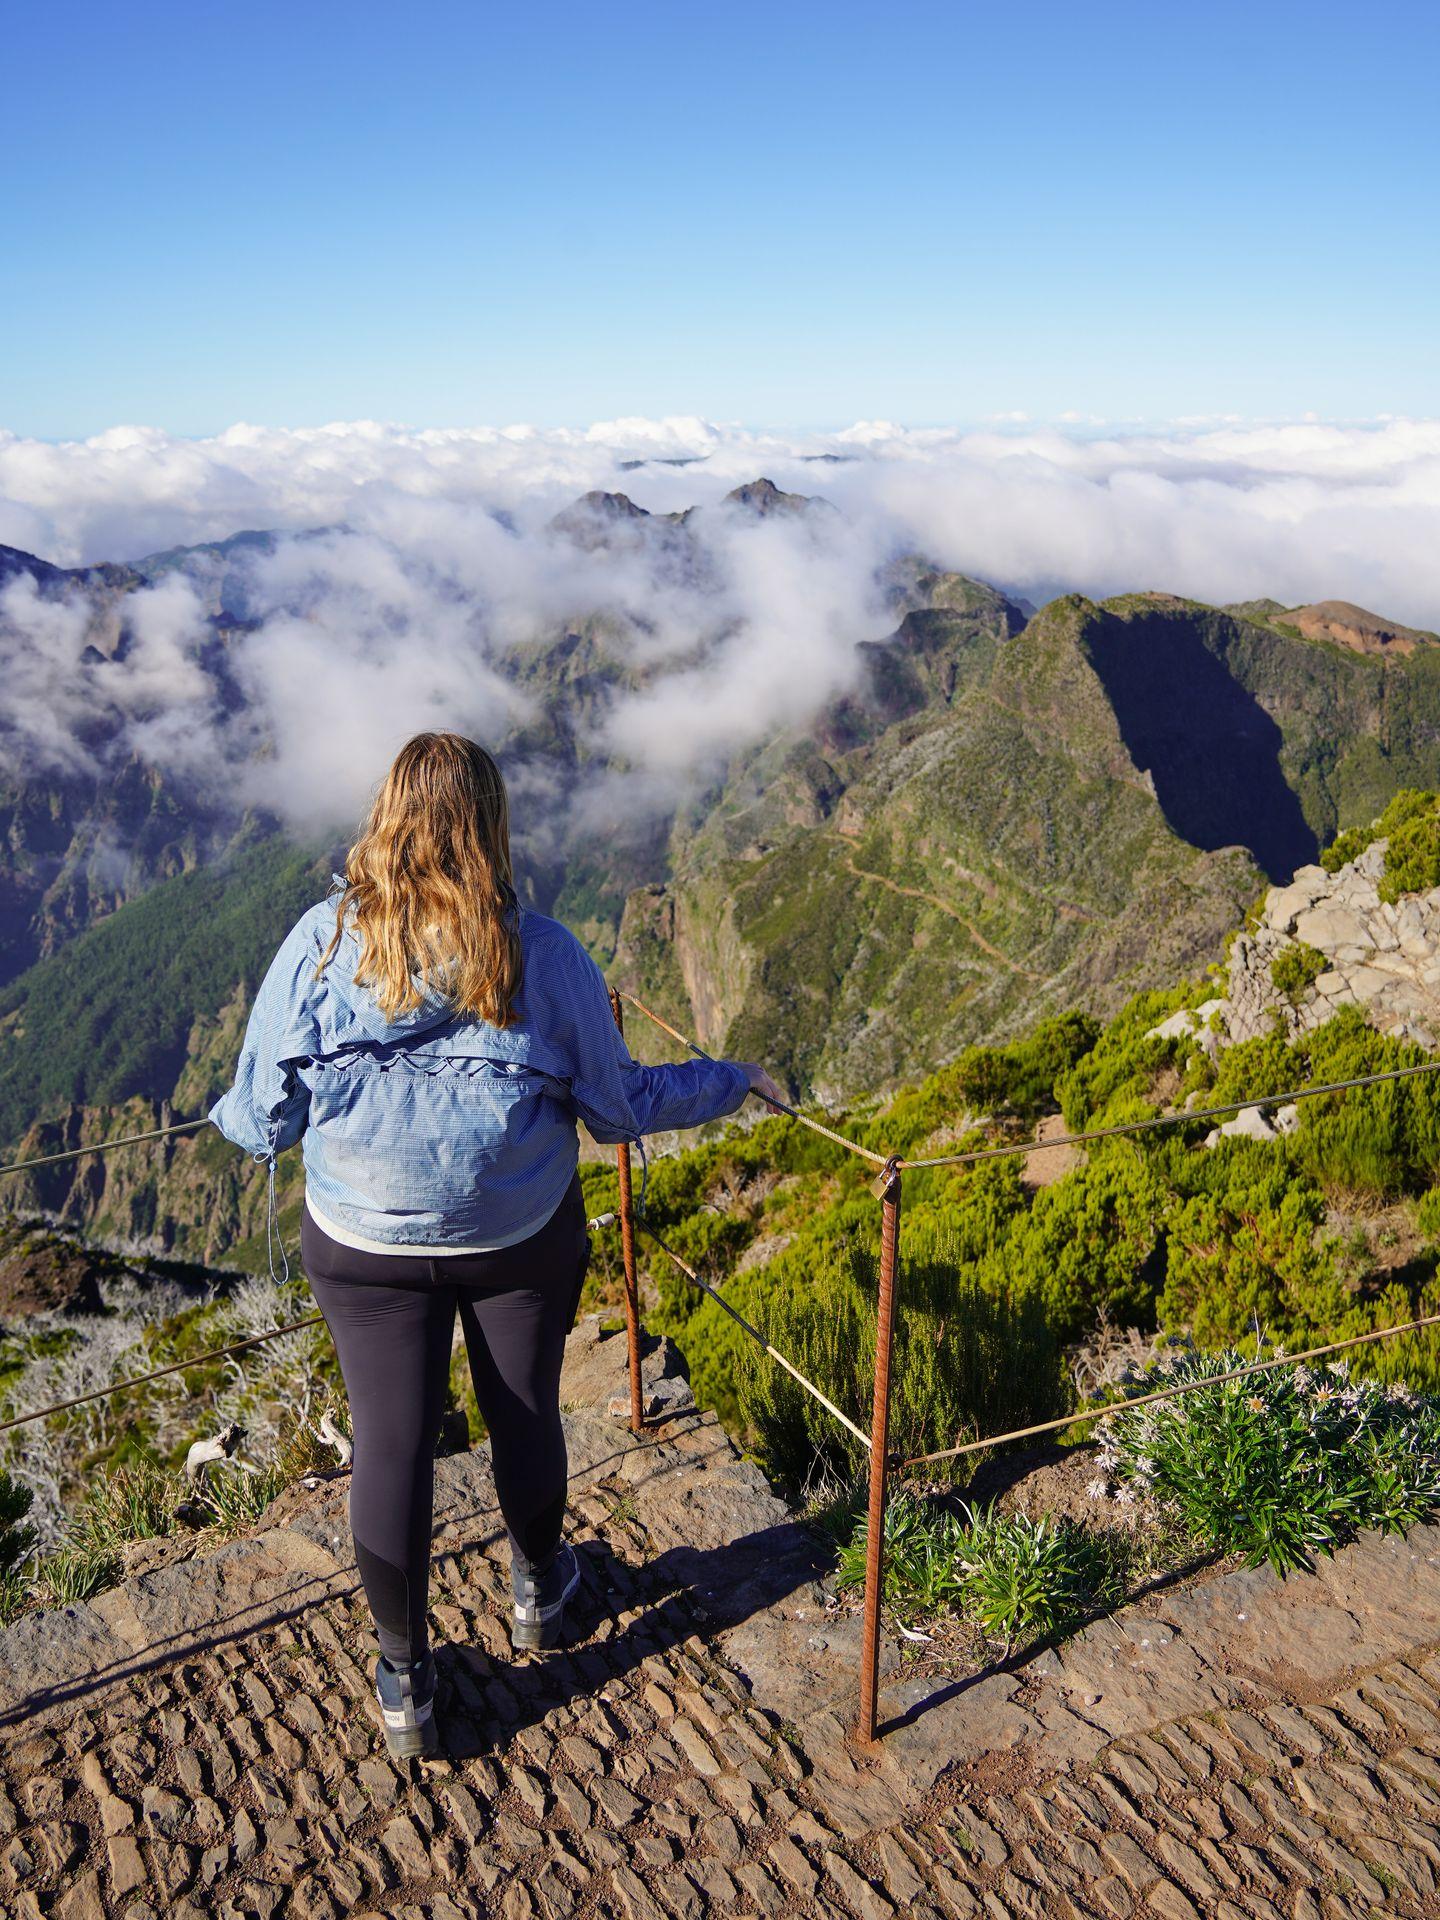 Lydia looking at the view of mountains and clouds from the top of Pico Ruivo